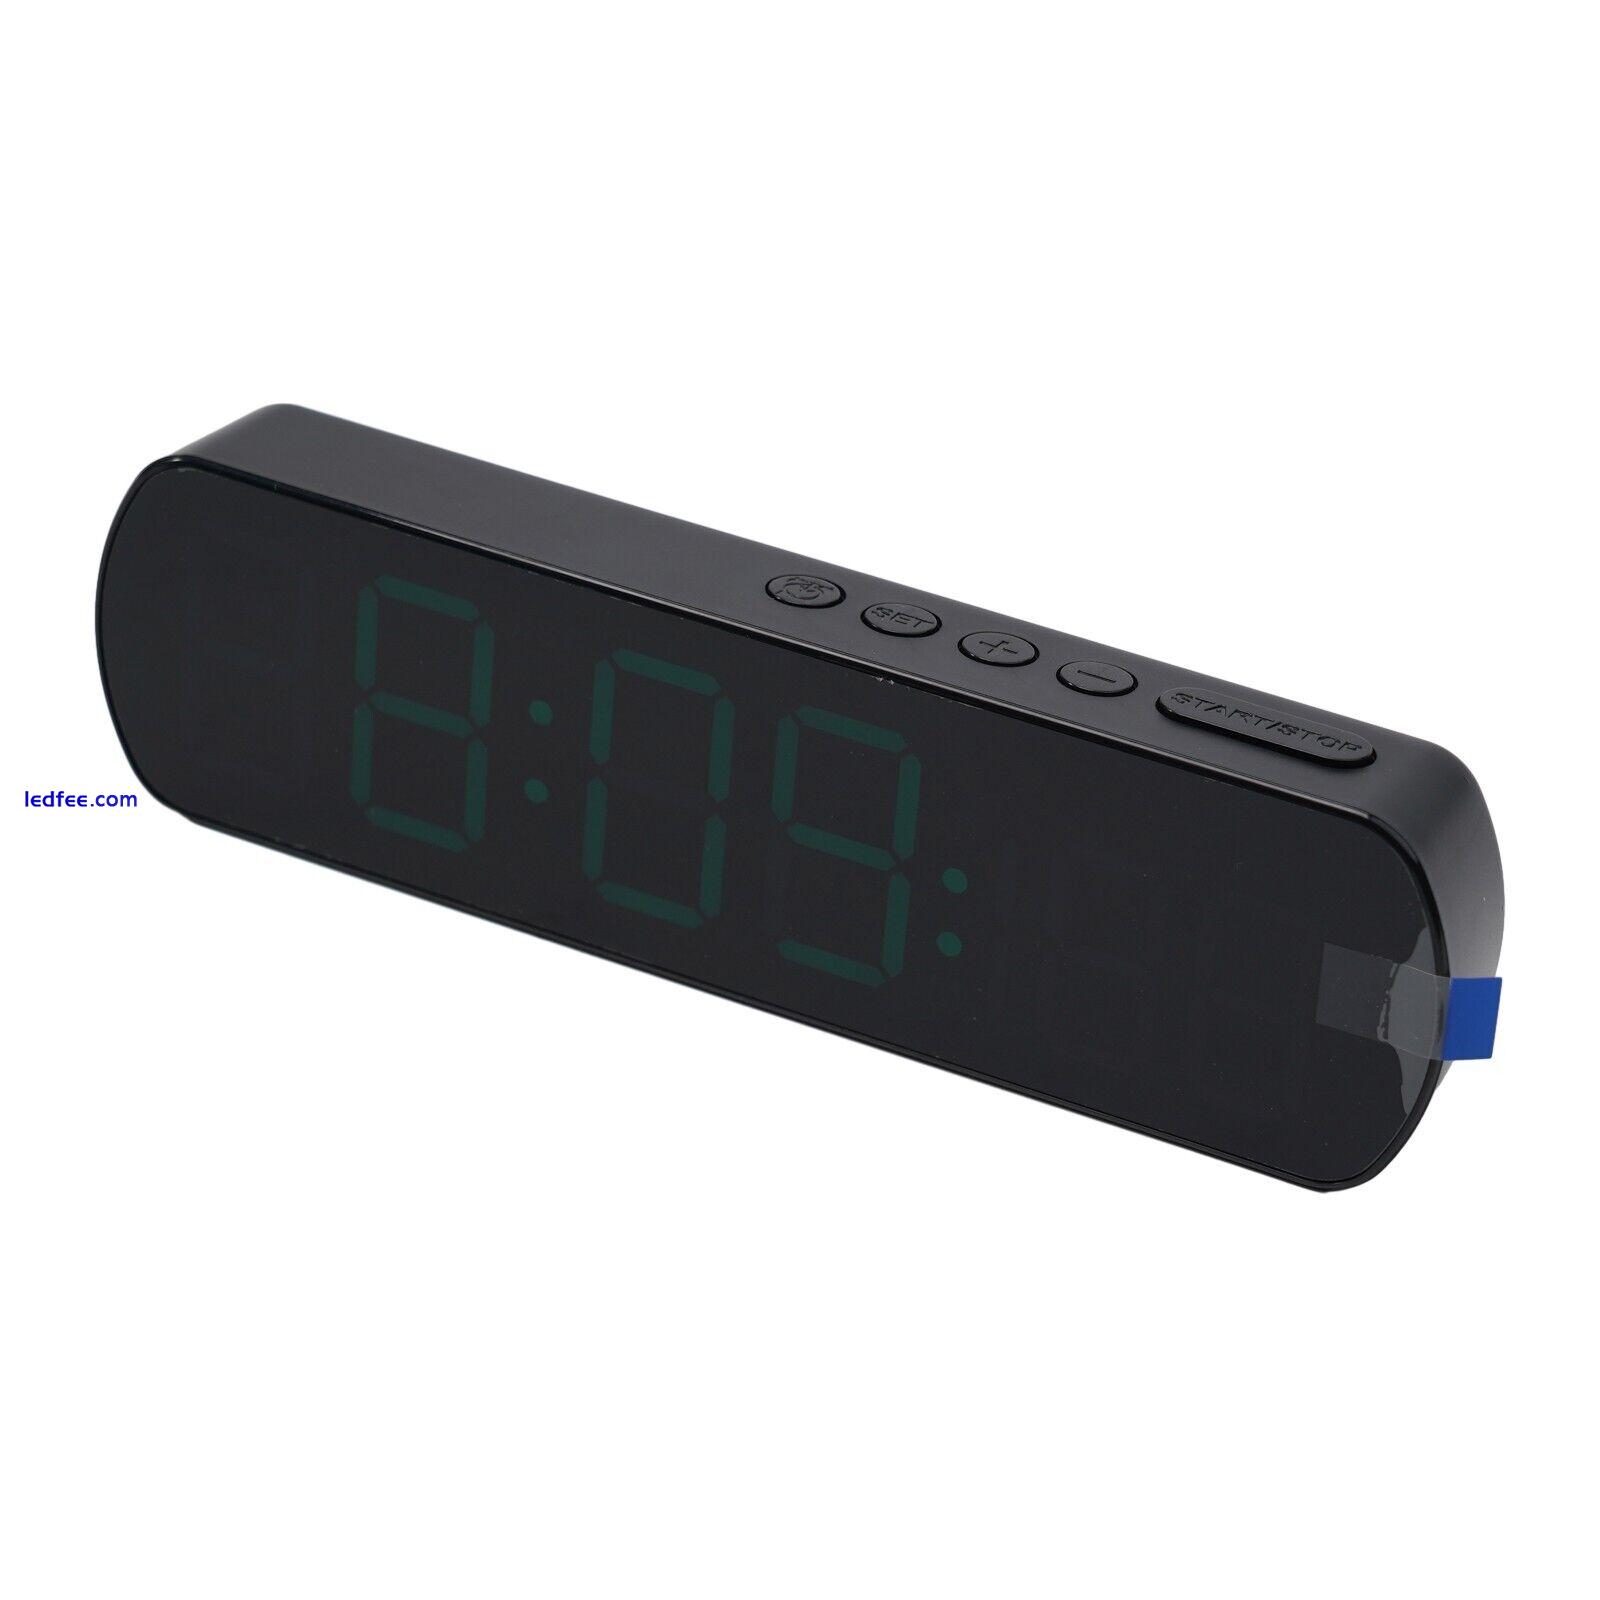 Desktop LED Alarm Clock with Temperature/Humidity Display & Timer Feature 4 